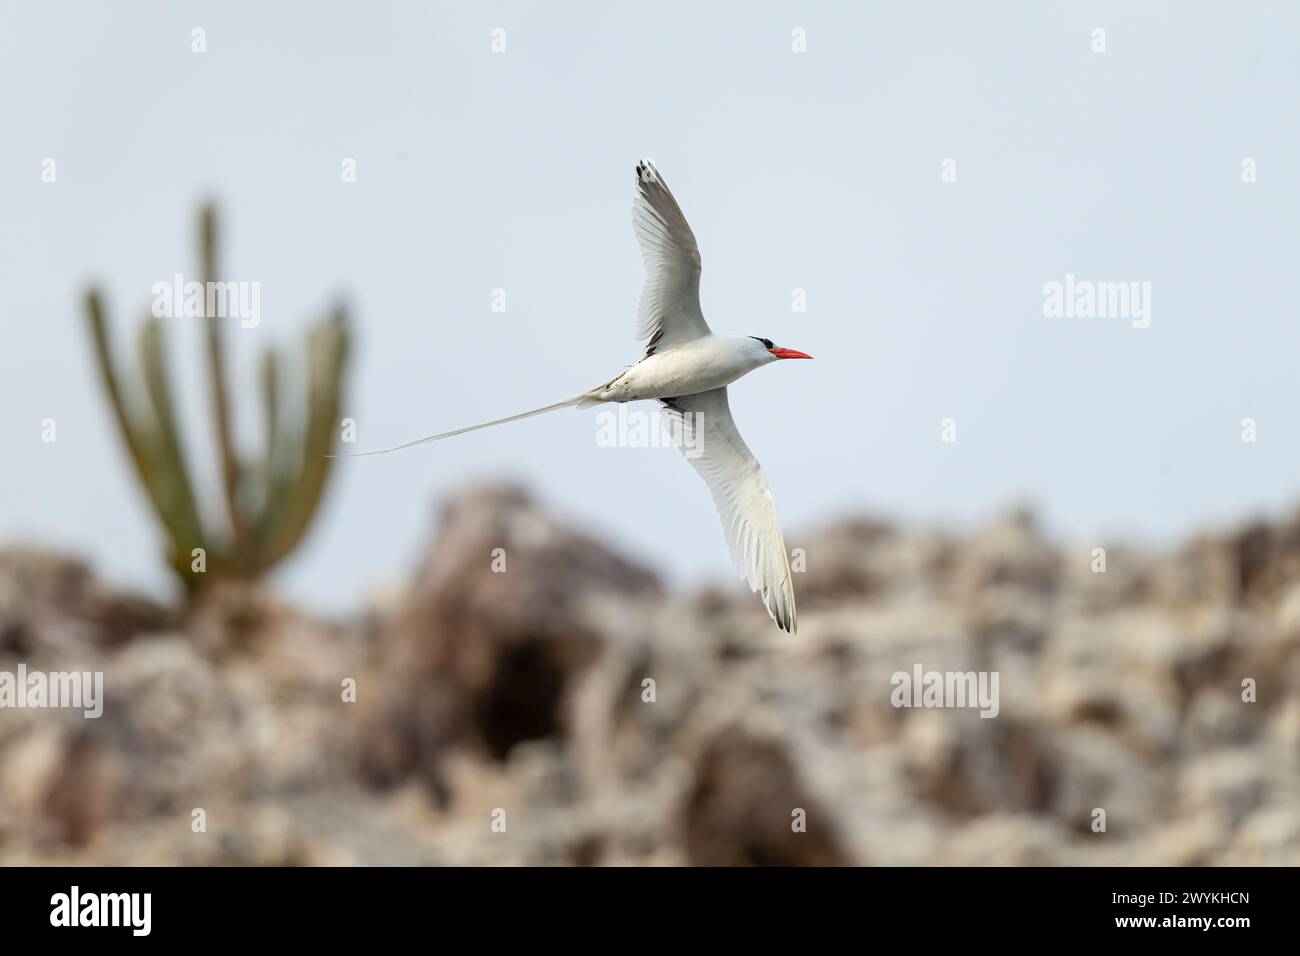 A red billed tropicbird (Phaethon aethereus) flying in Baja California Sur, Mexico. Stock Photo